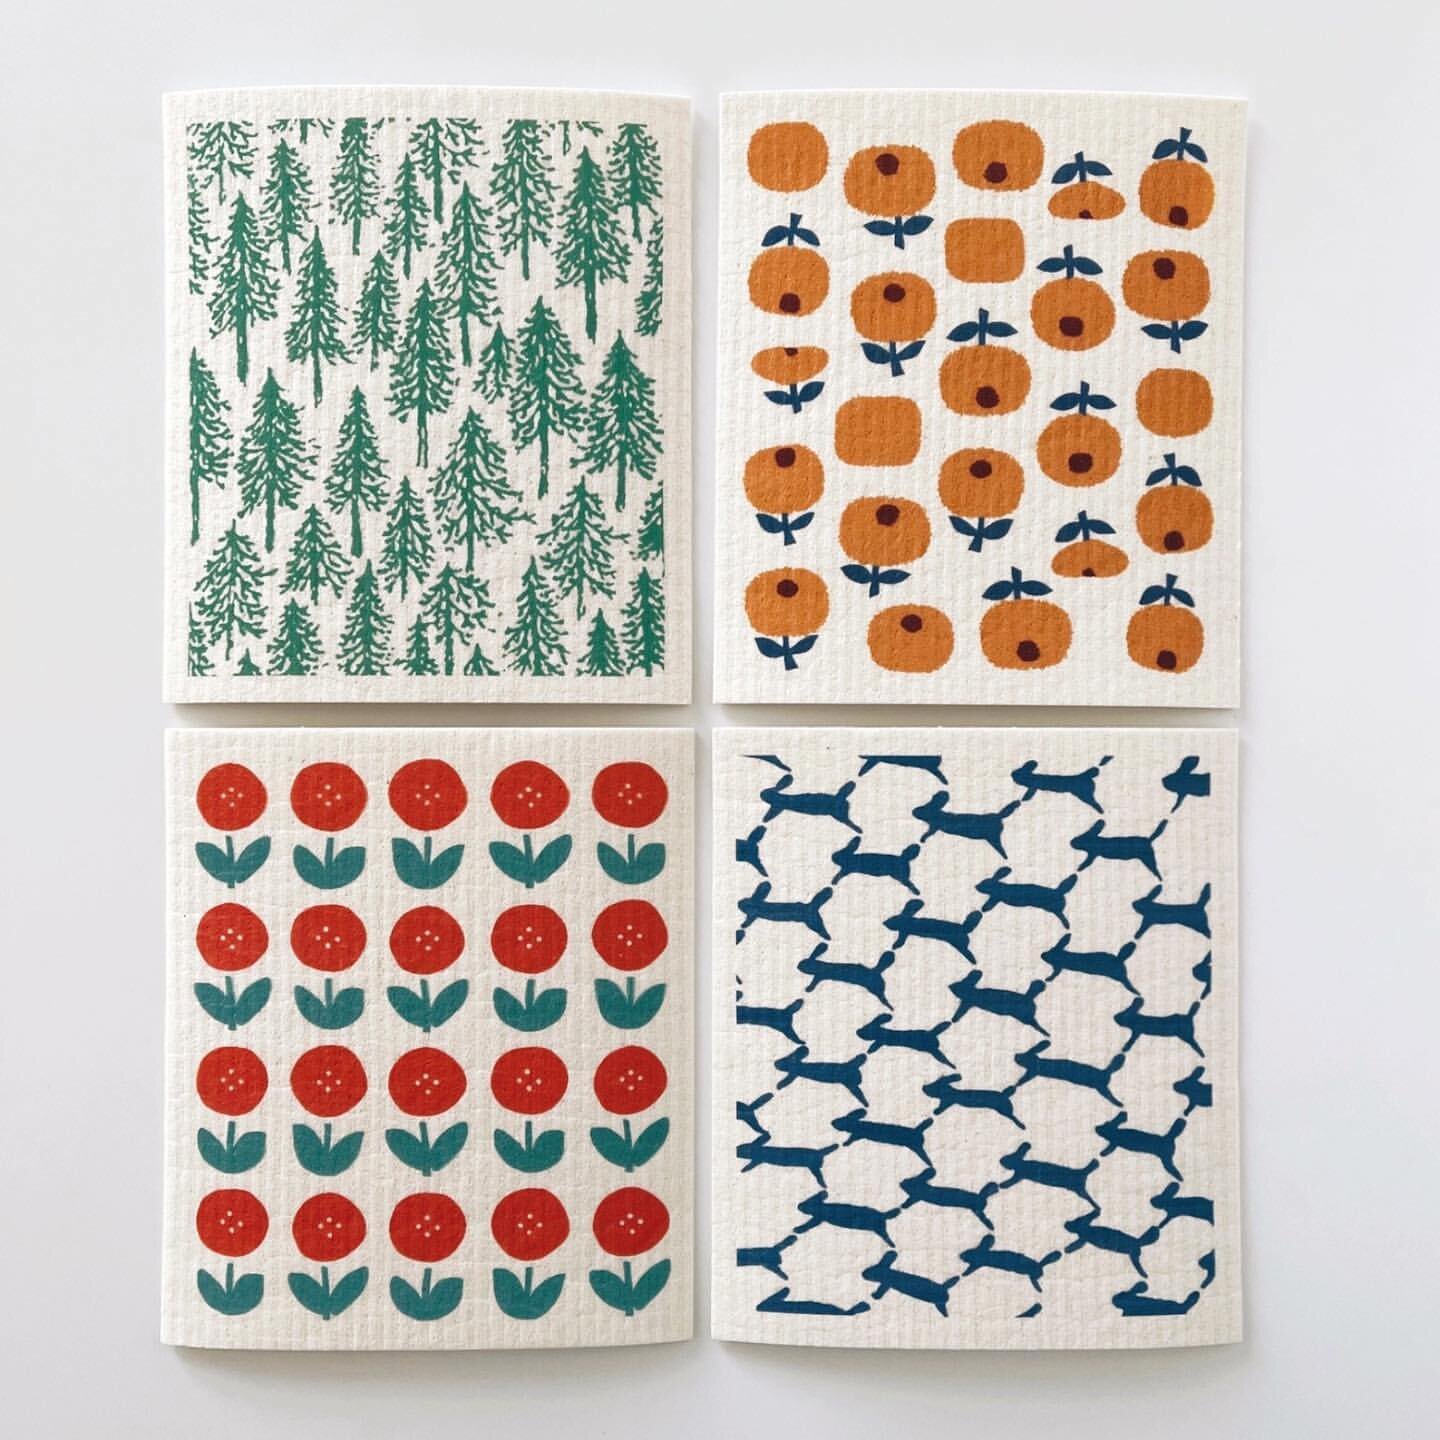 Bring home one of @even_perfect&rsquo;s thoughtfully-curated home essentials like these environmentally conscious Swedish dishcloths when they join FAD Market&rsquo;s @governorsisland pop-up market this weekend! They always deliver and never disappoi